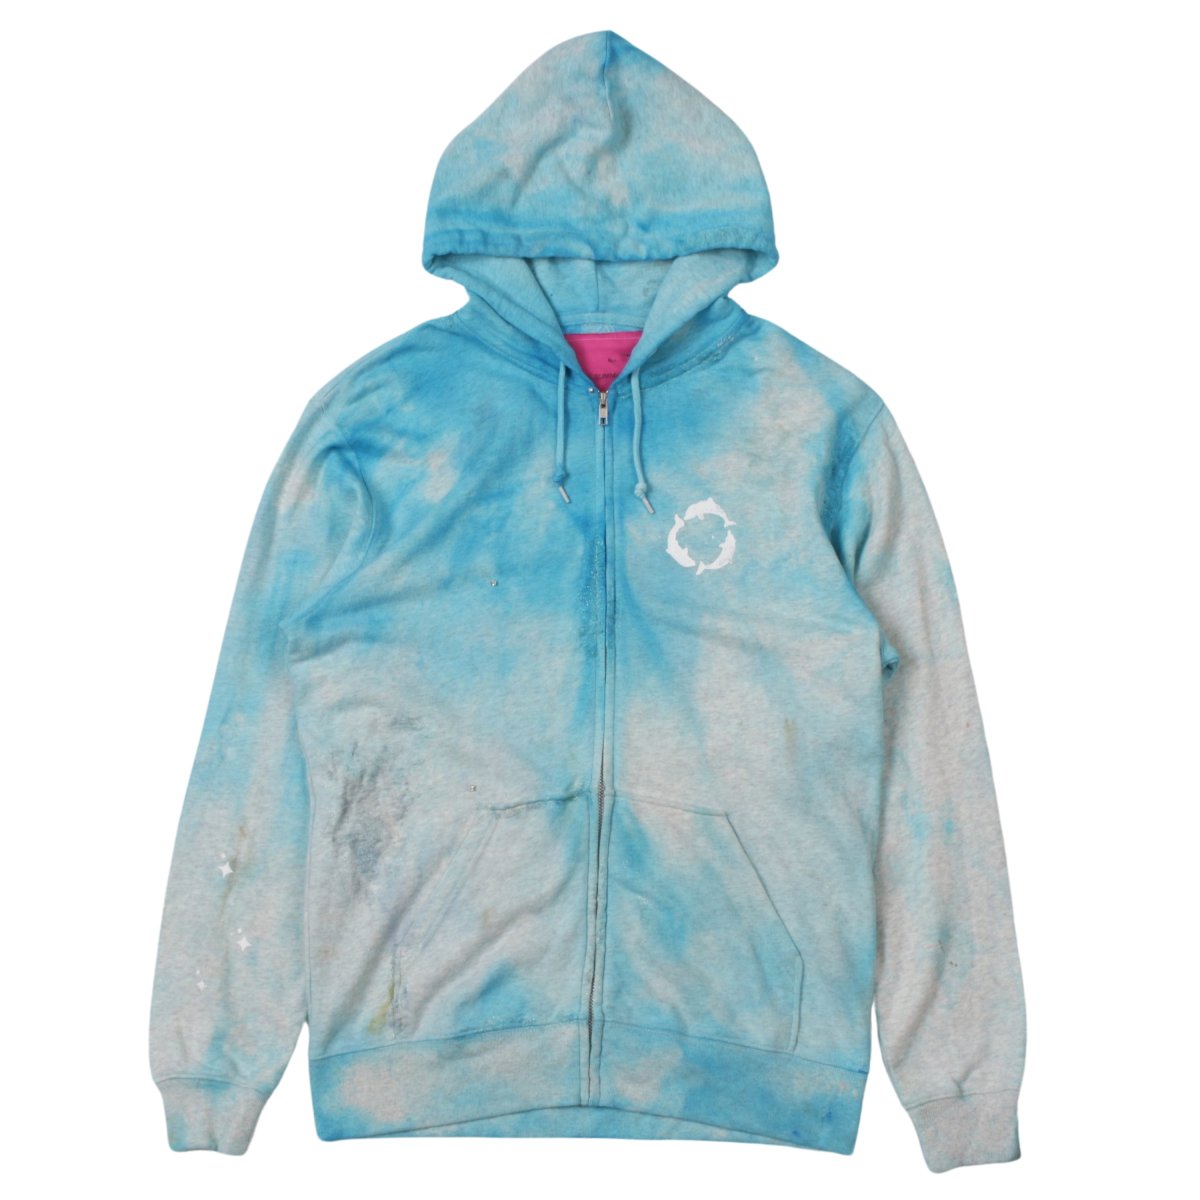 Jurassically Dyed Potion Zip-up Hoodie 04